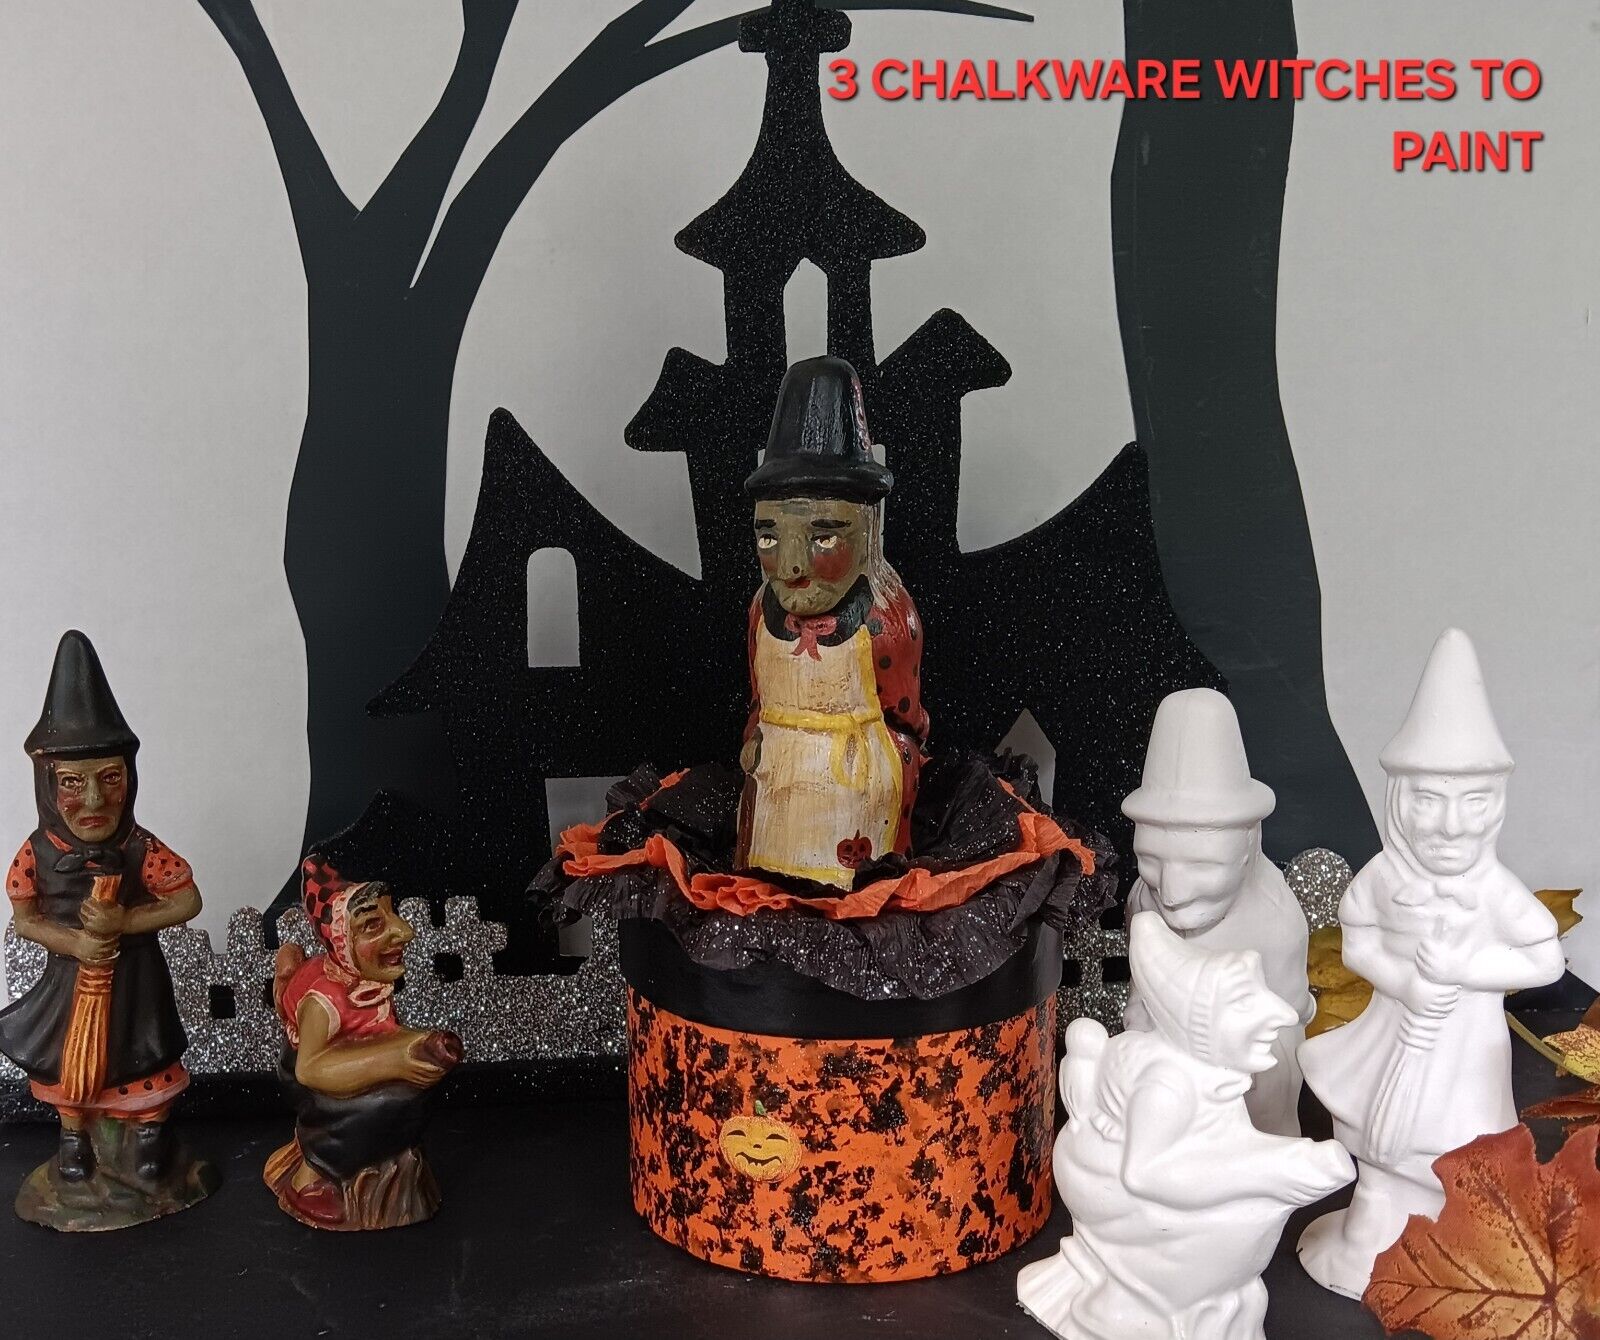 3 Vintage Chalkware Witches To Paint From Antique Chocolate Molds & Instructions